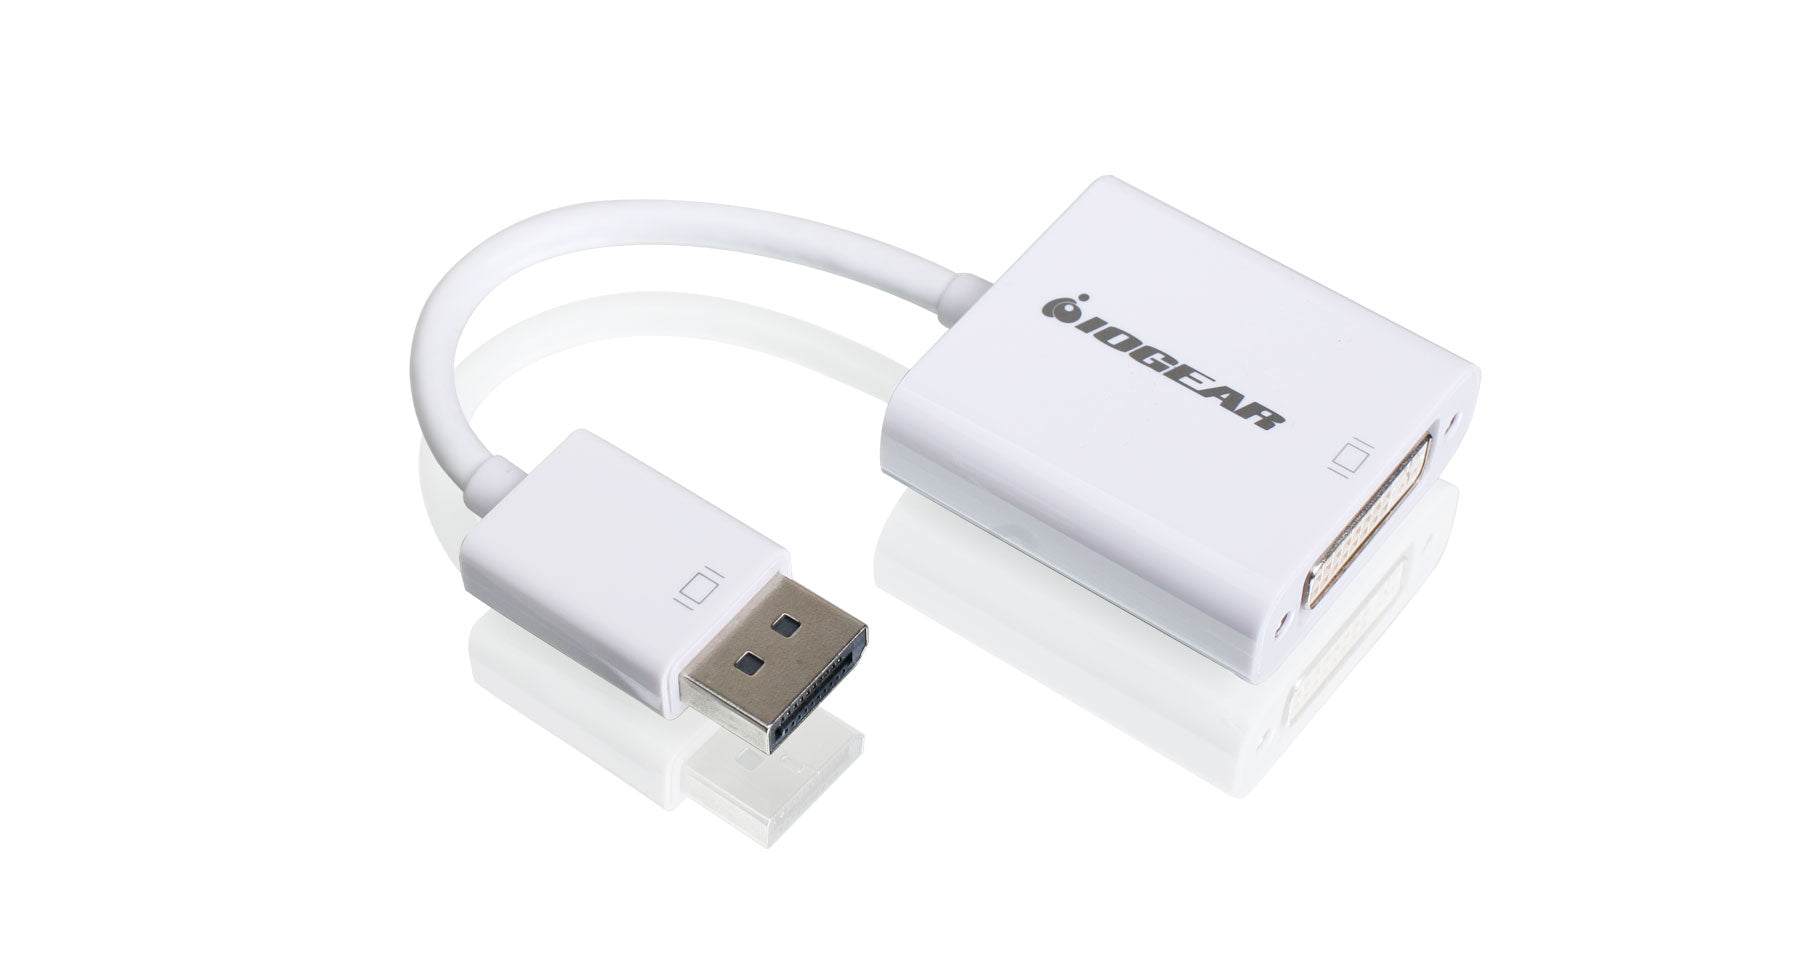 DisplayPort to DVI Adapter Cable